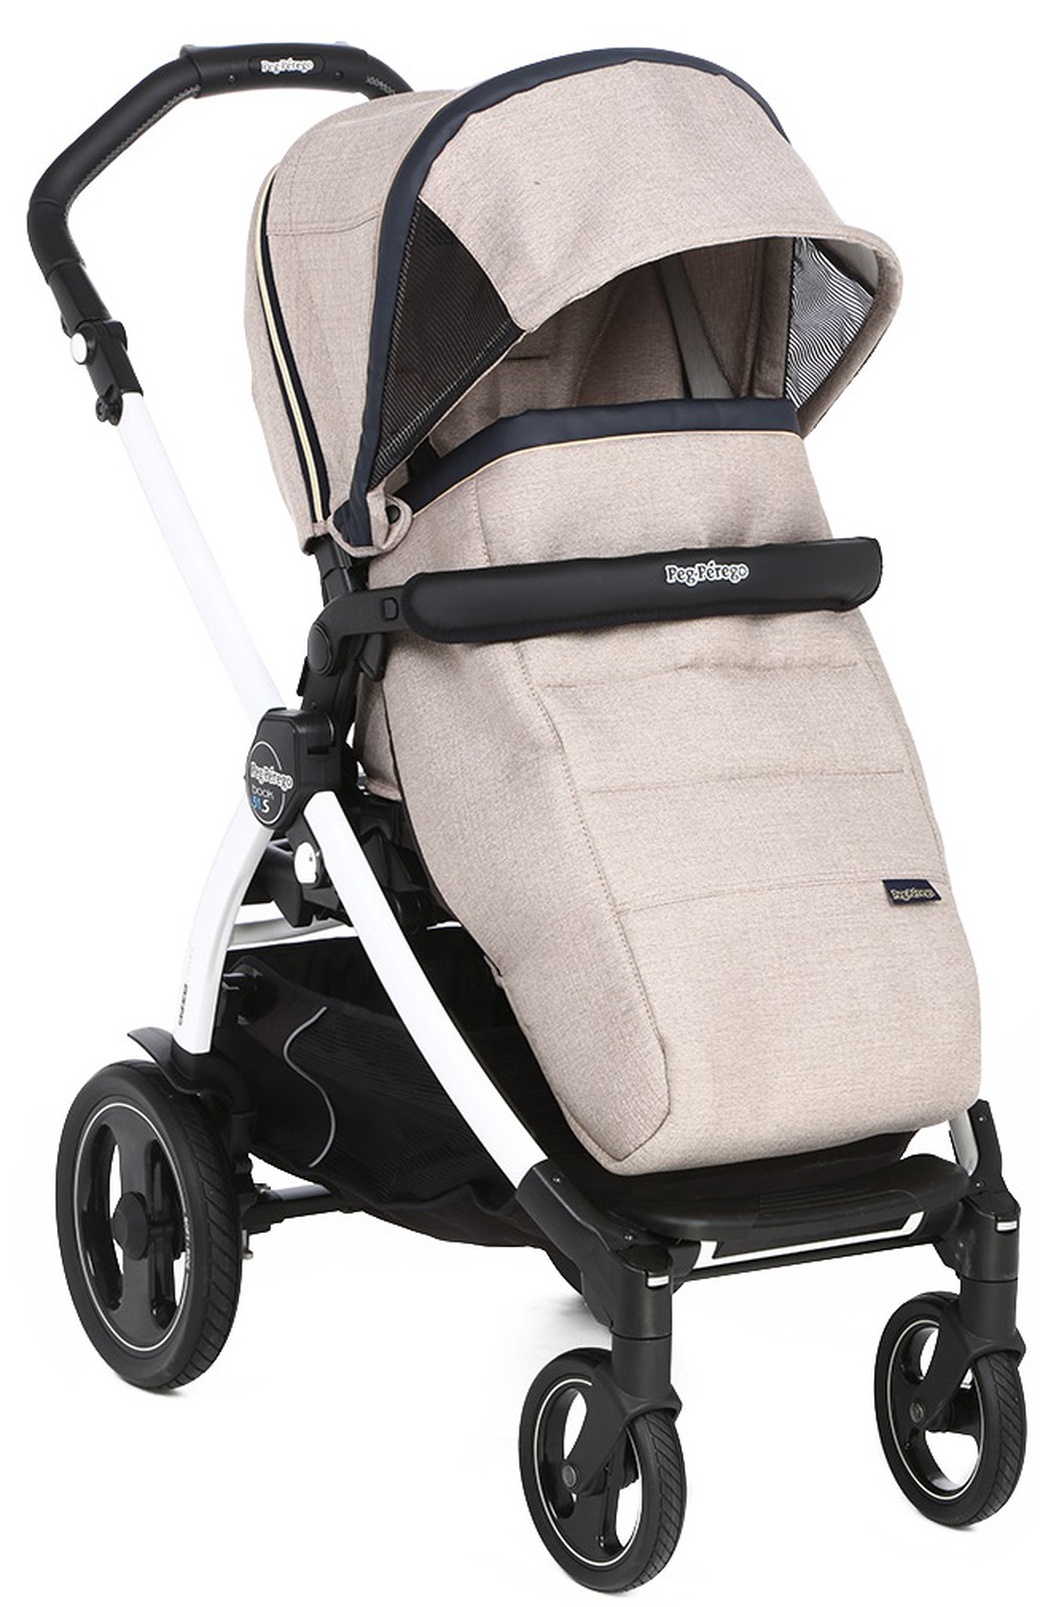 Peg-Perego Book Plus Pop-up Completo - прогулочная коляска S B, W Luxe Beige фото